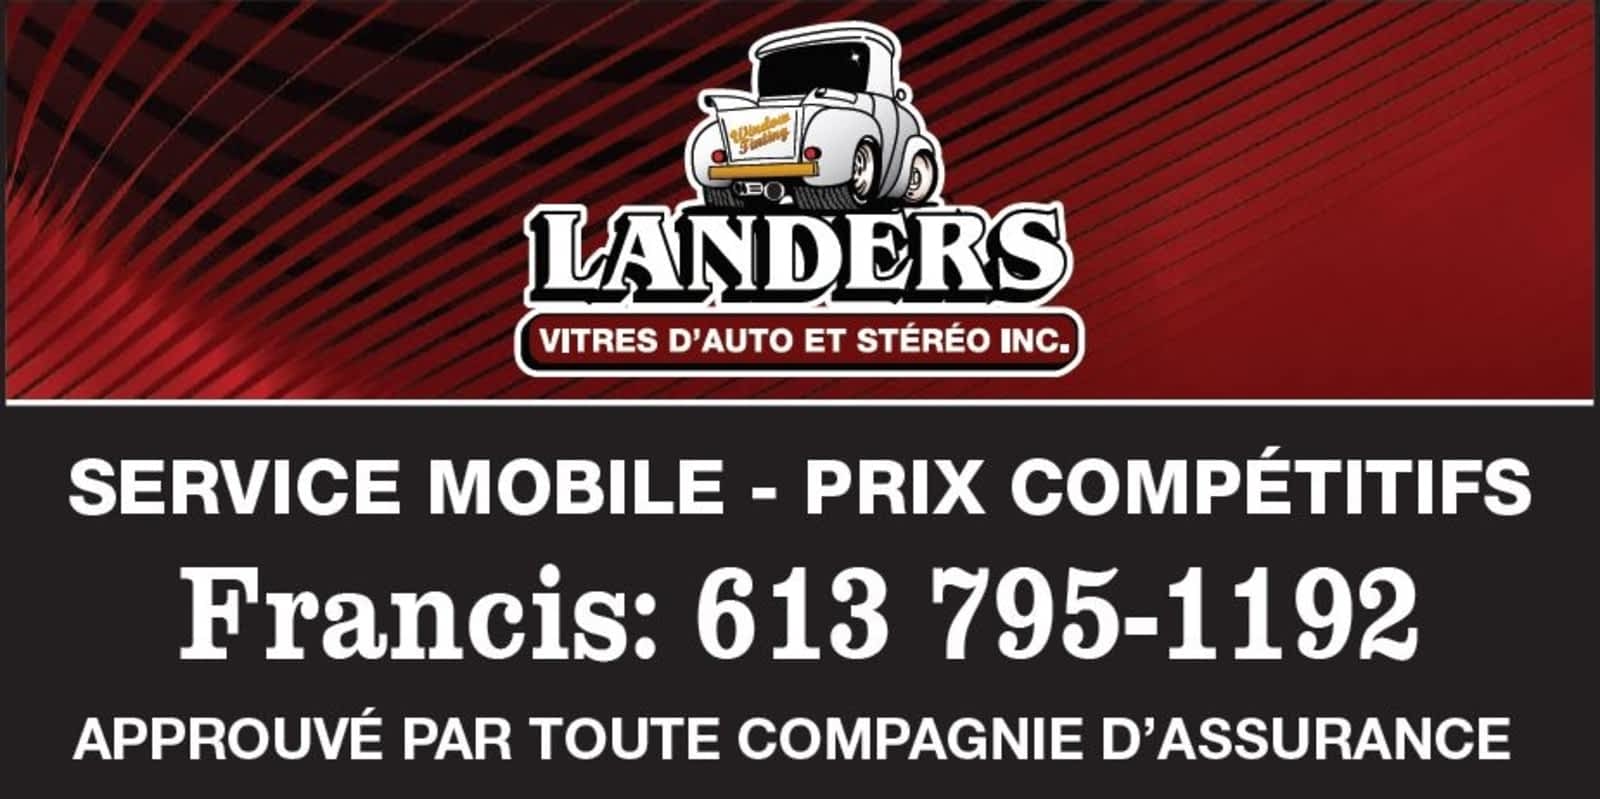 Landers Auto Glass and Stereo Inc 1172 St Albert Rd, Embrun Ontario K0A 1W0